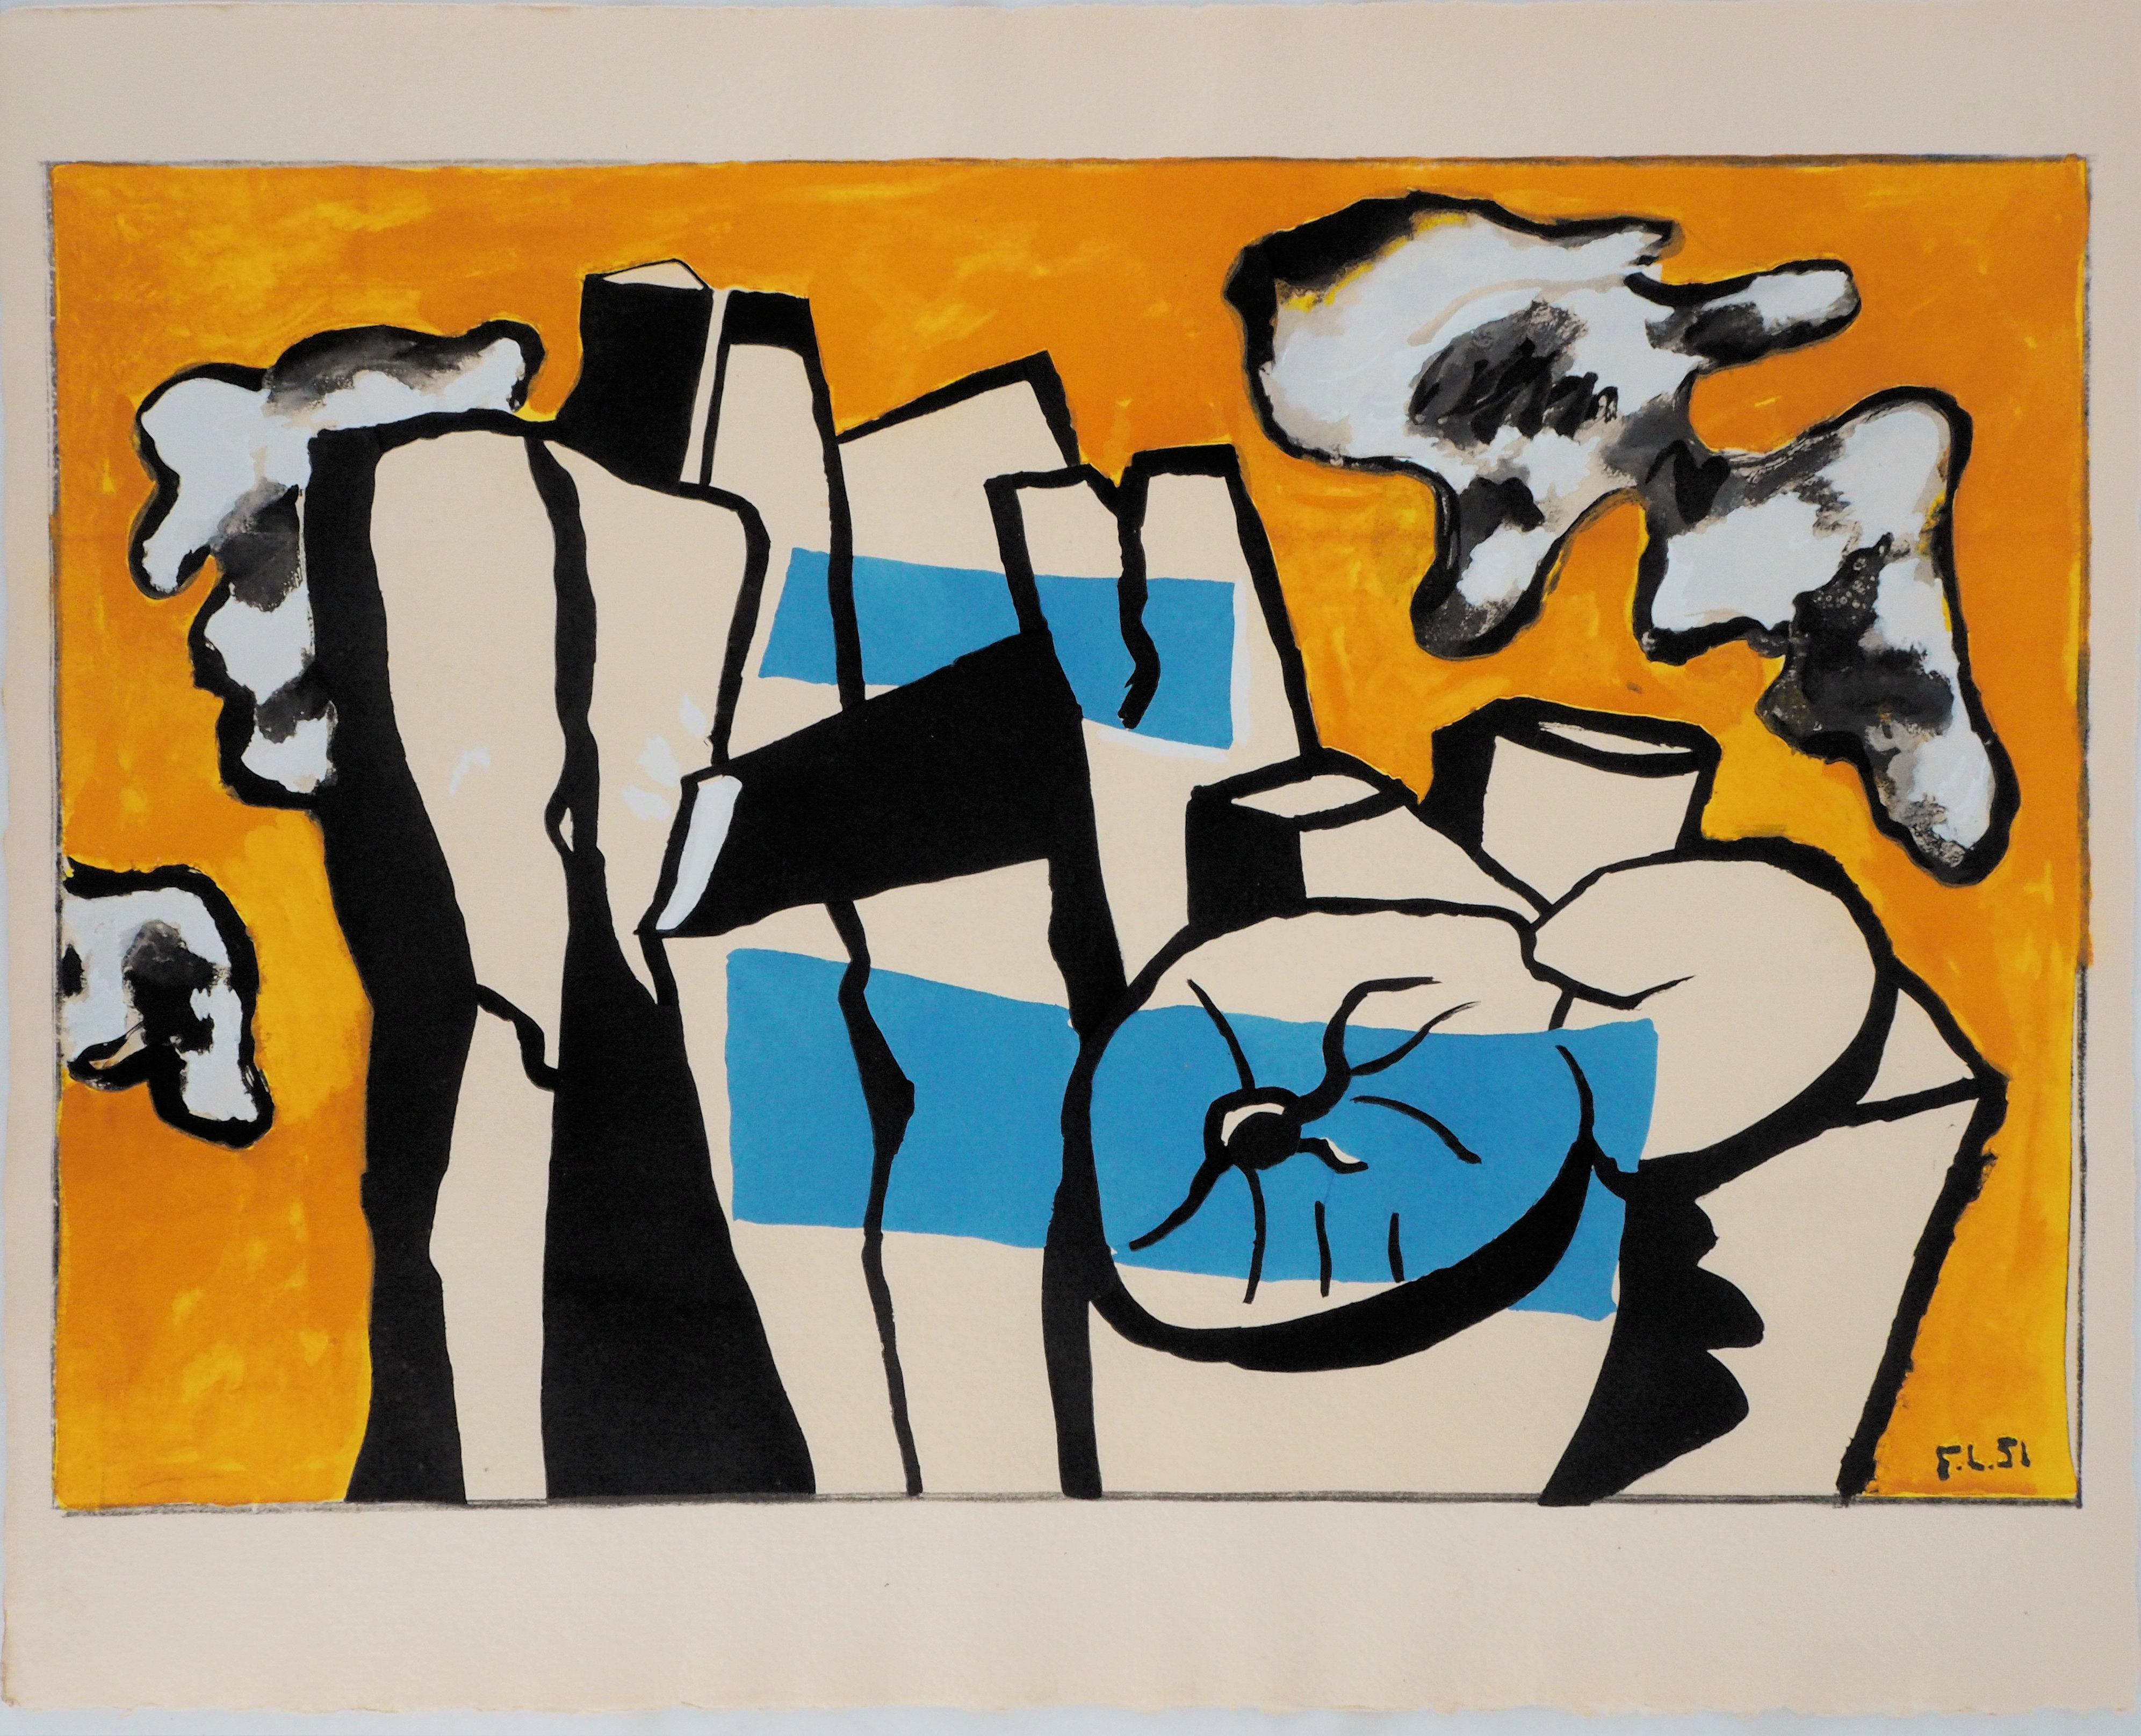 Cubist Wood Logs - Lithograph and Stencil, 1959